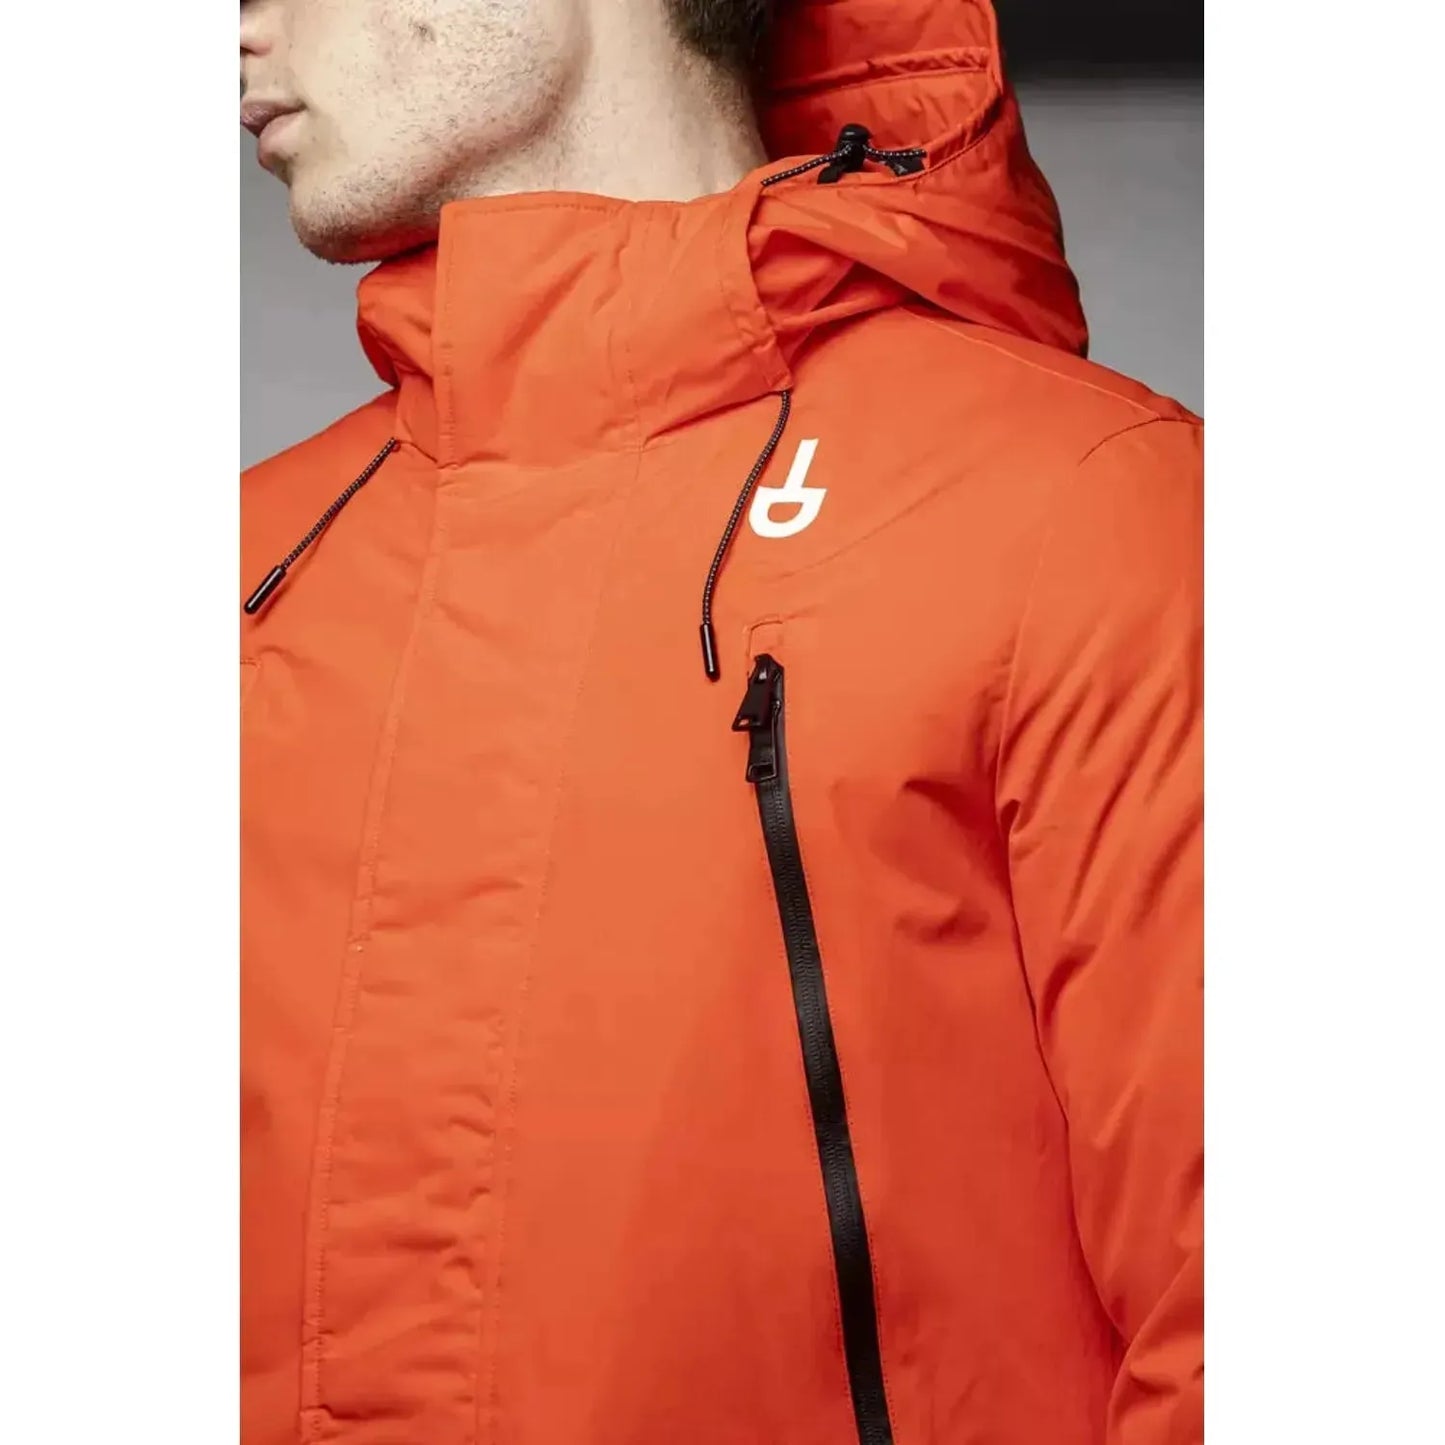 Tond Chic Red Water-Repellent Hooded Jacket MAN COATS & JACKETS red-jacket